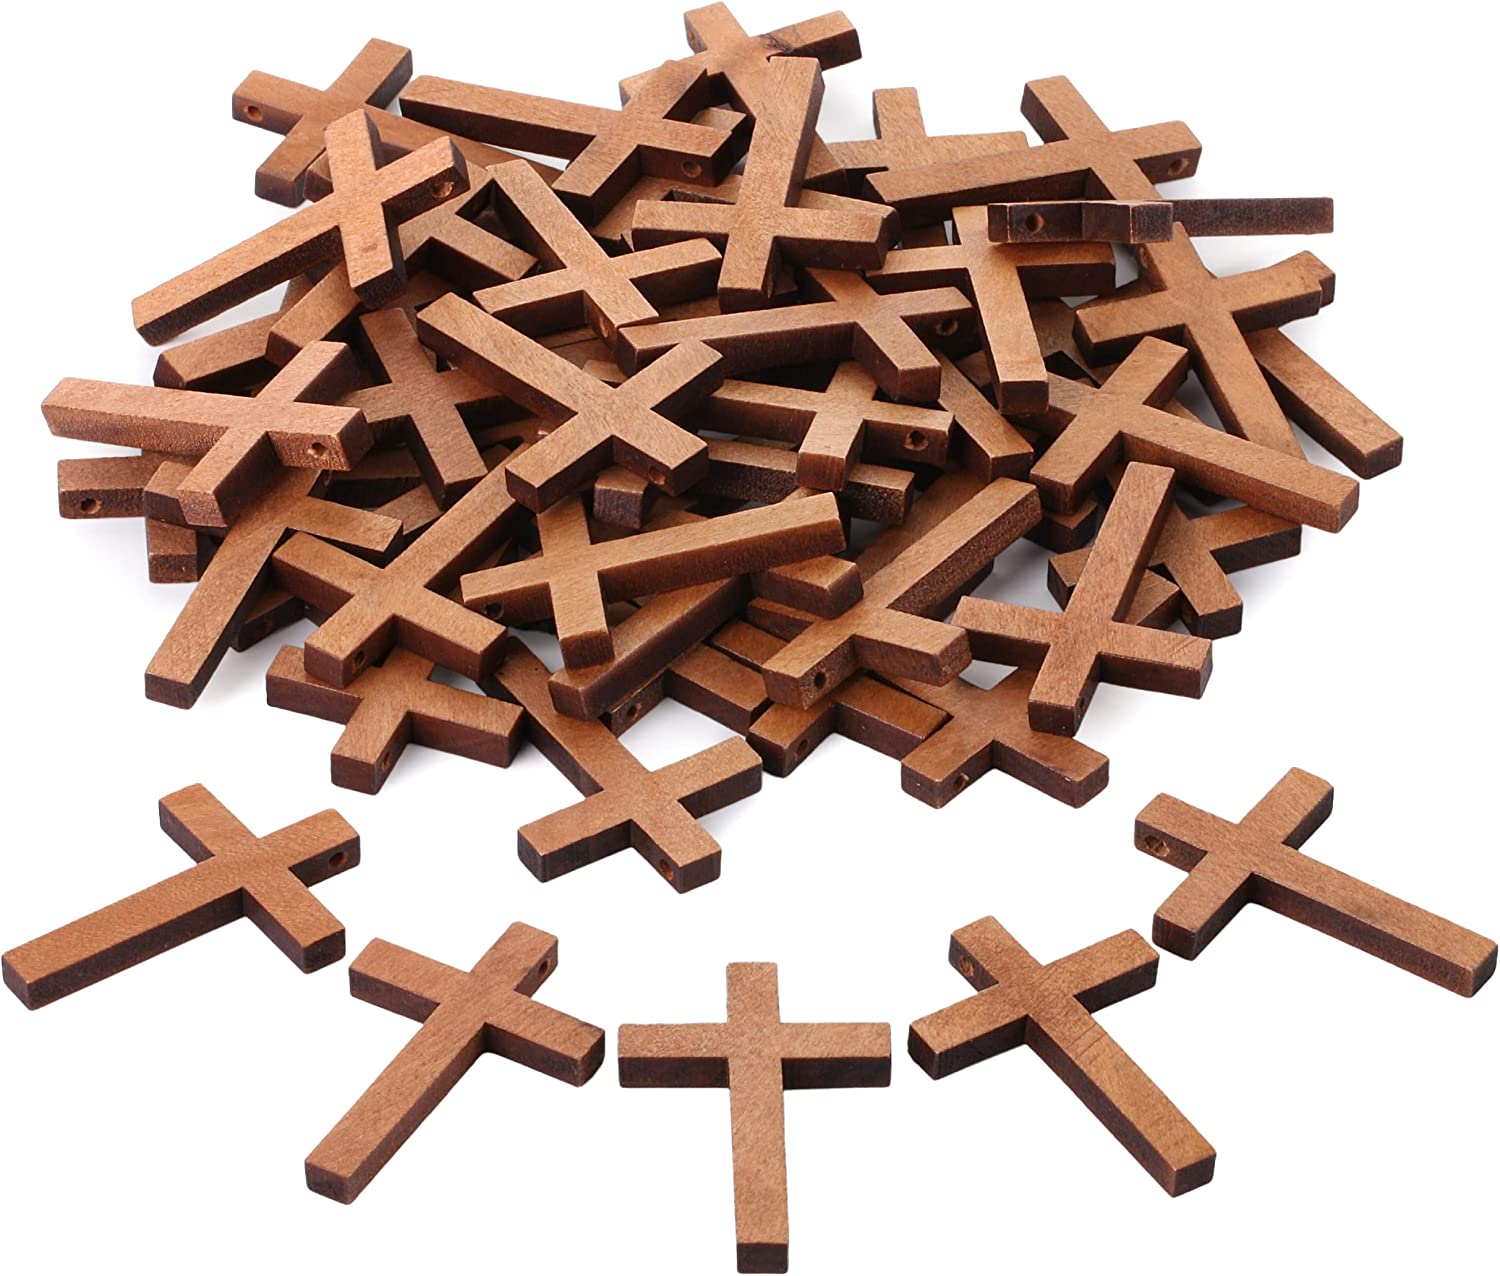 Mr. Pen- Wooden Crosses, 1.2 x 1.75 Inches, 50 Pack, Small Wooden Crosses,  Wood Crosses for Crafts, Small Cross Pendant